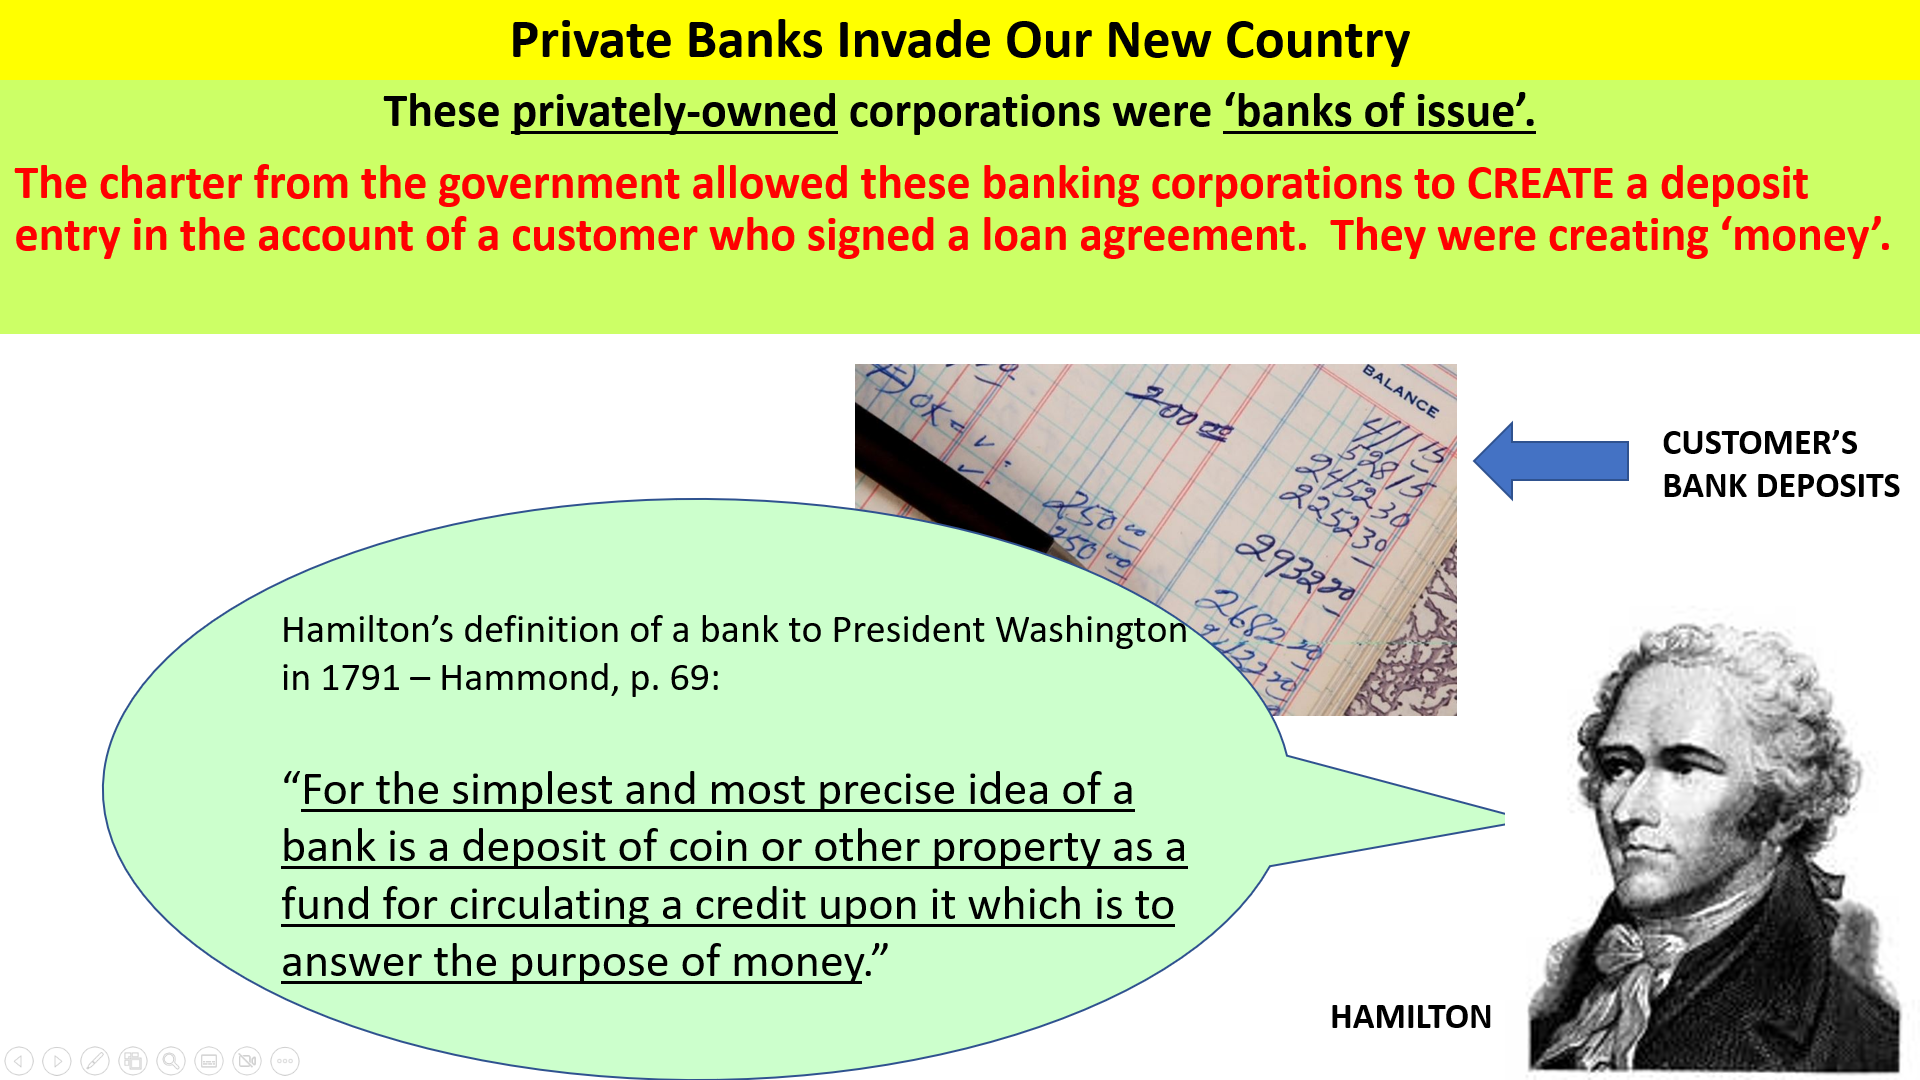 private bank charters gave the right to create money